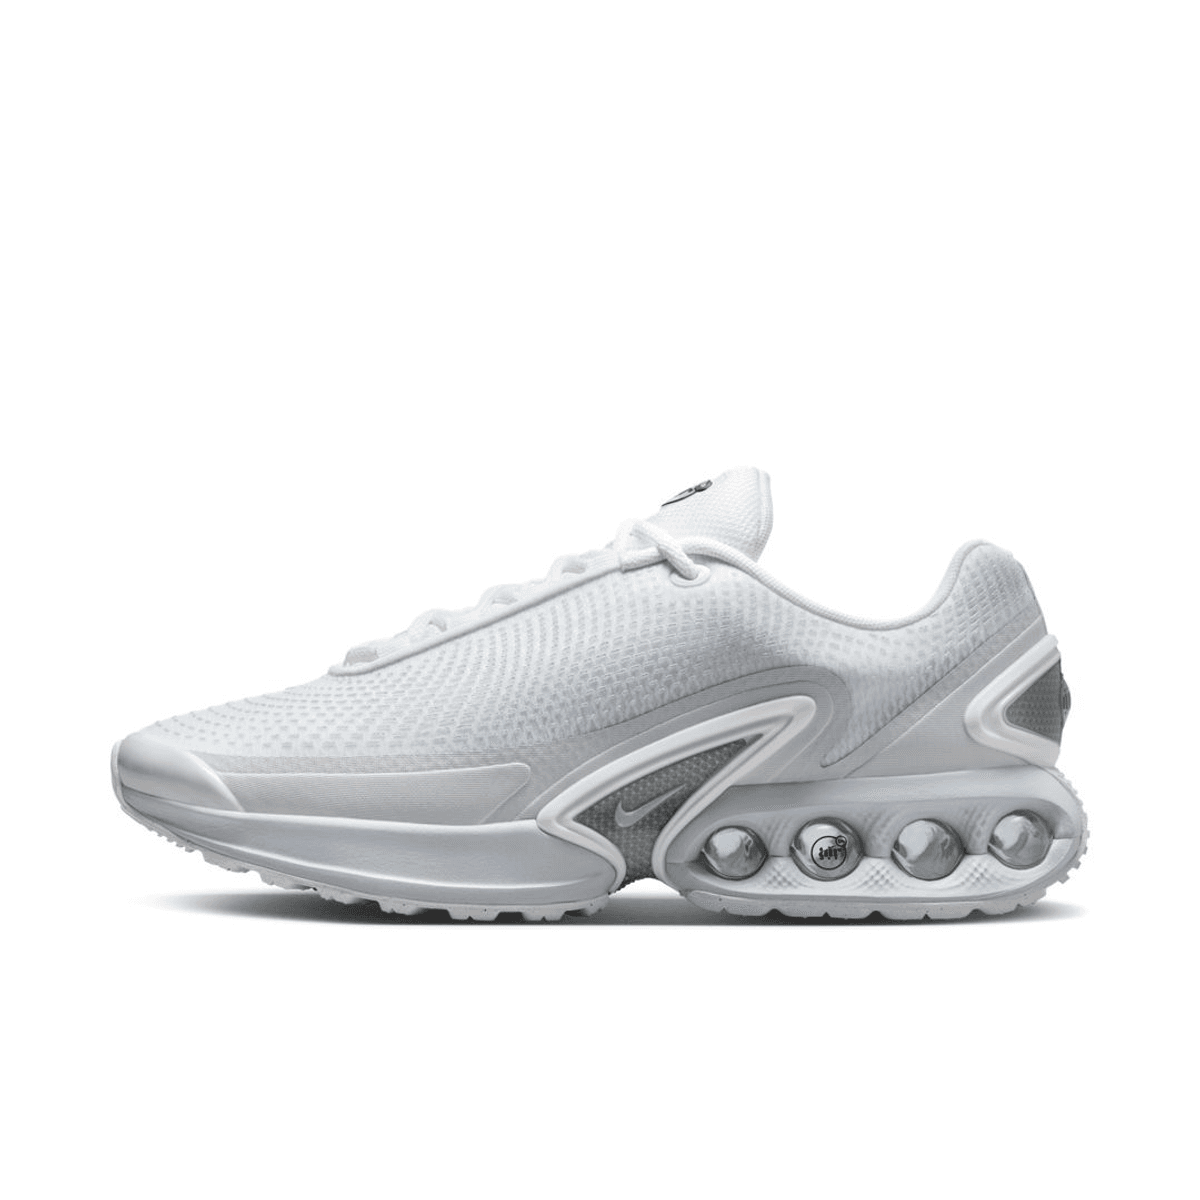 The Nike Air Max Dn “White/Metallic Sliver” Releases March 2024